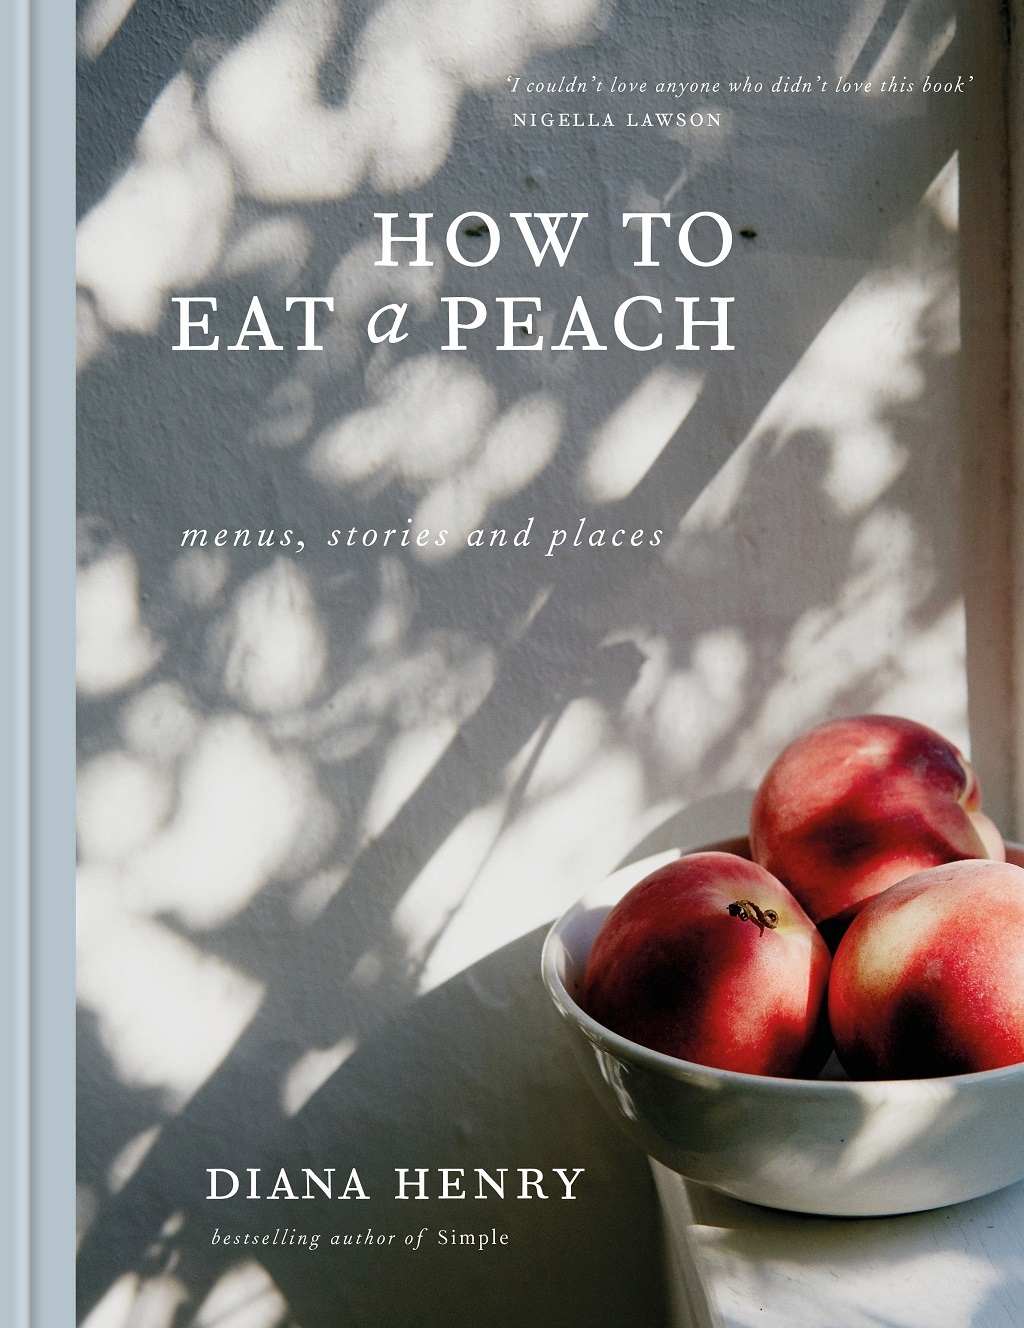 Diana Henry's new book How to Eat a Peach